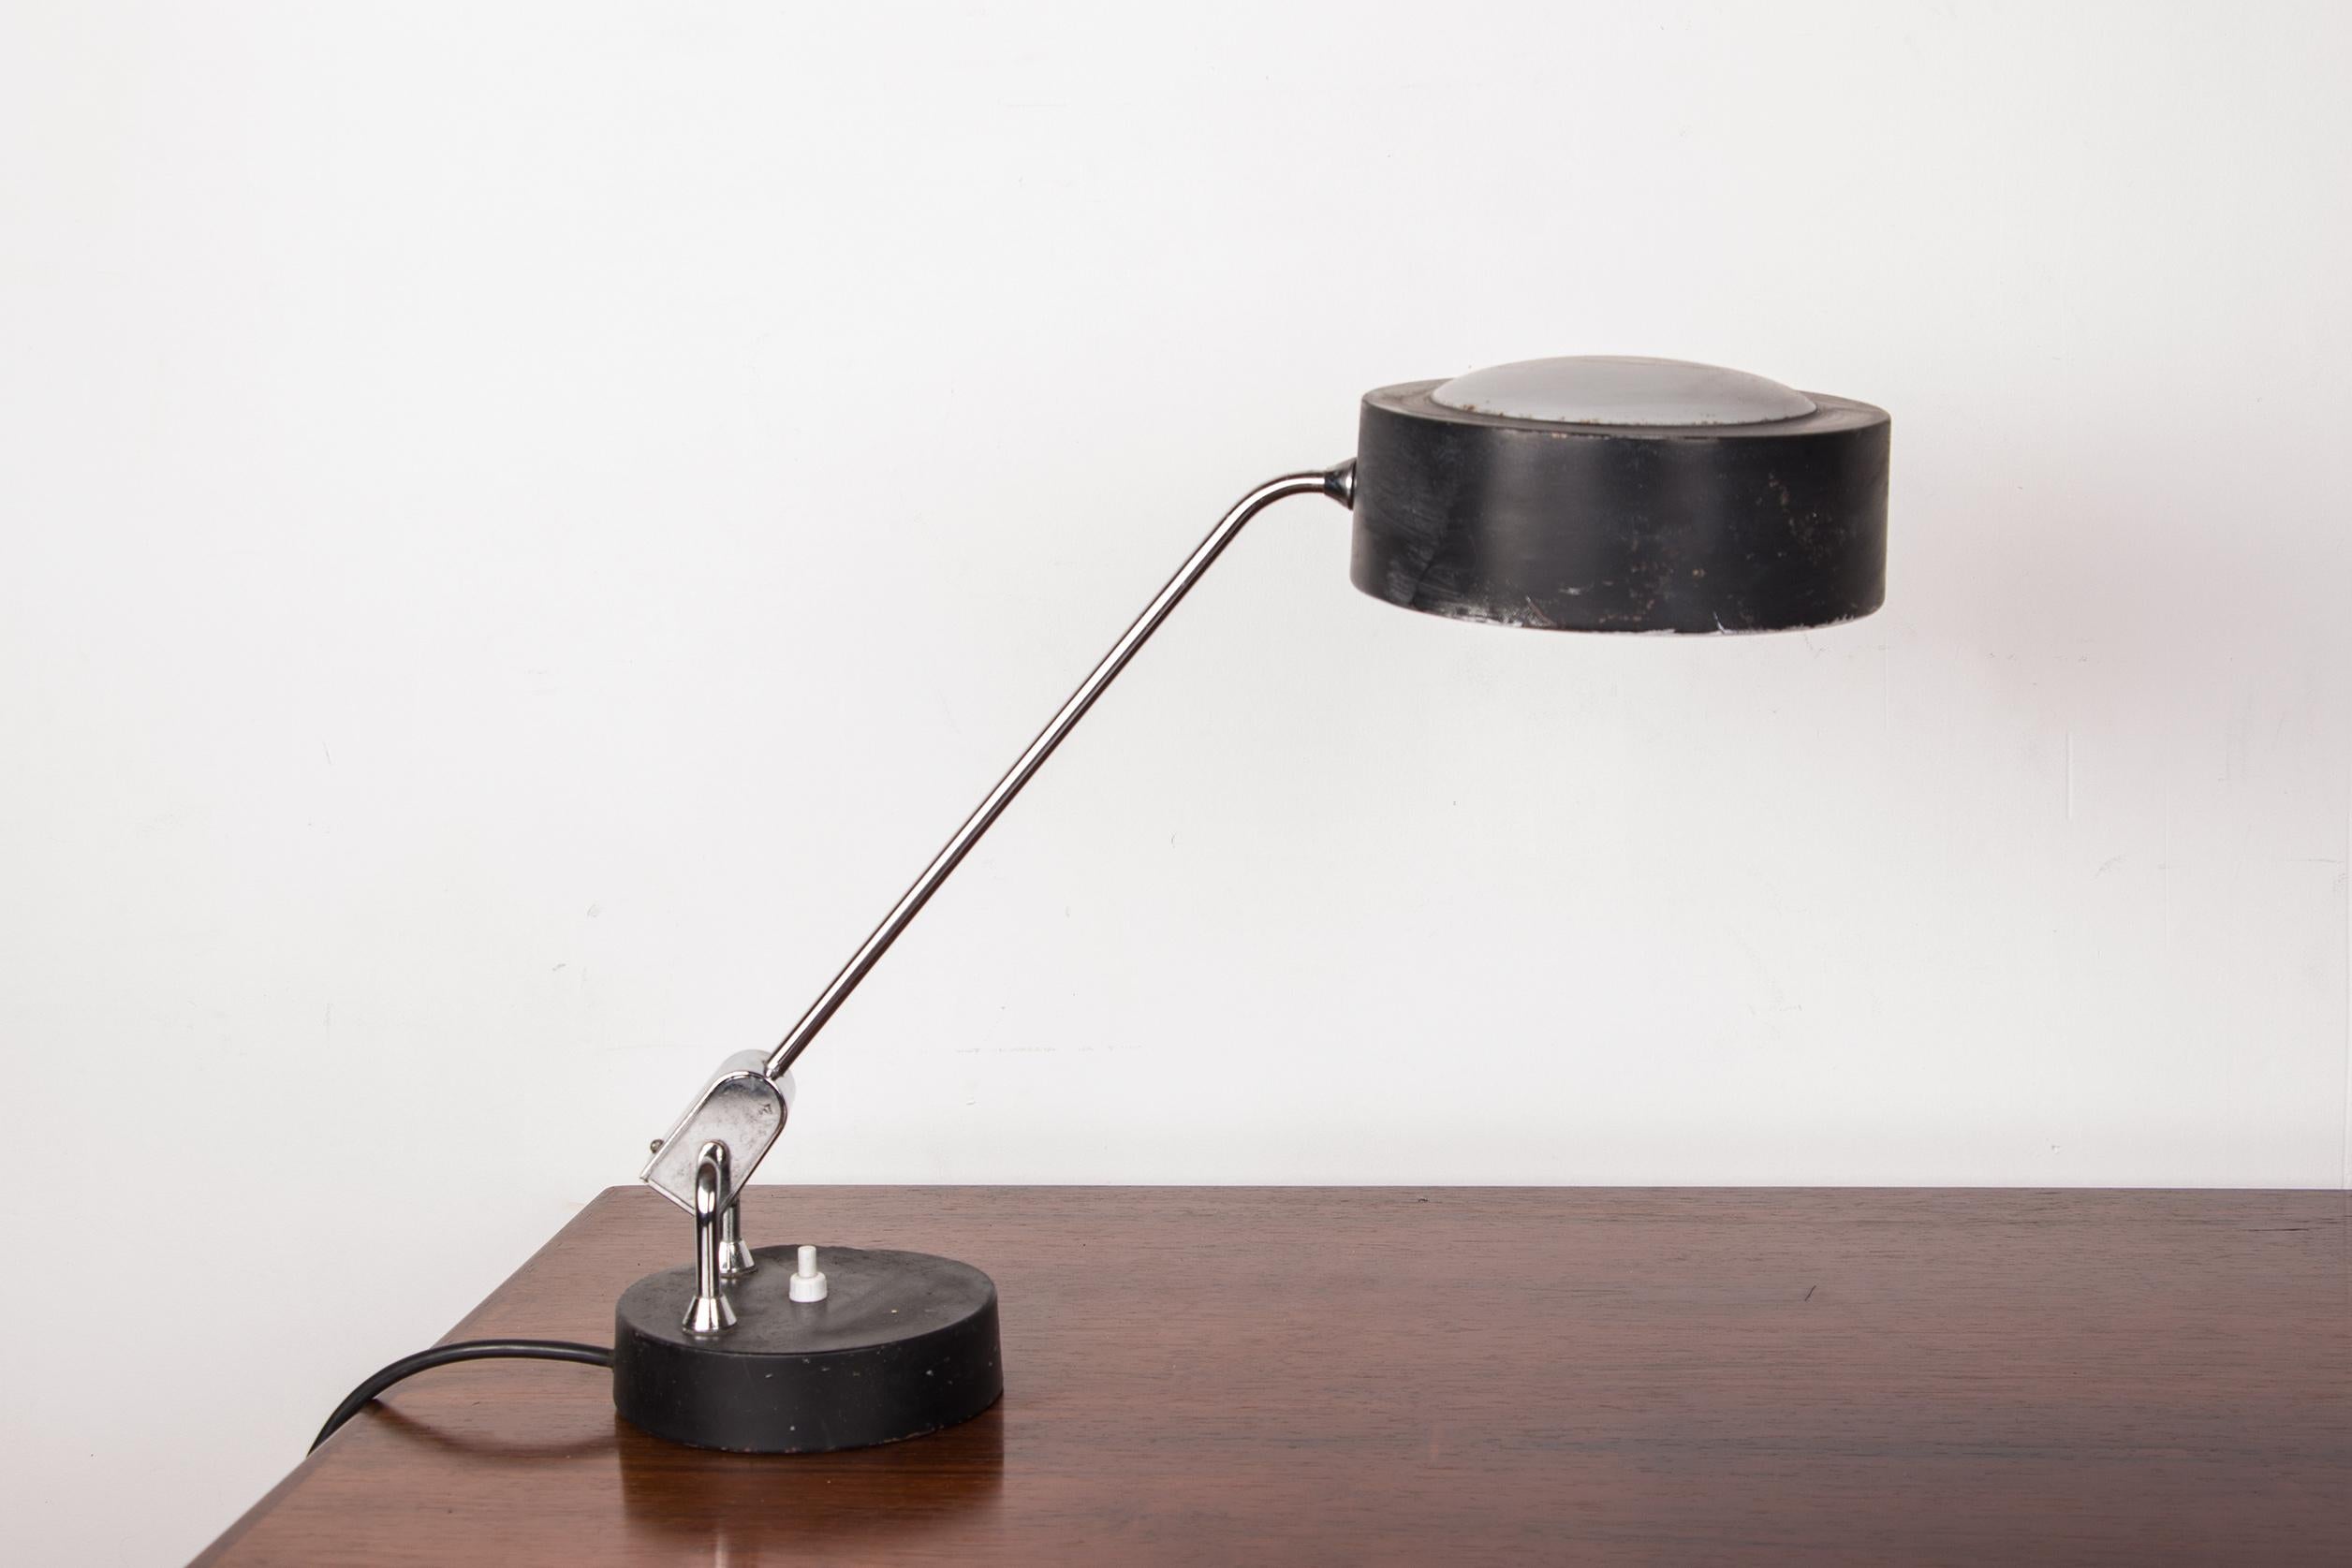 Pretty large desk lamp with articulating arm that allows you to adjust the direction of the light. Light cover and base on spherical base.
